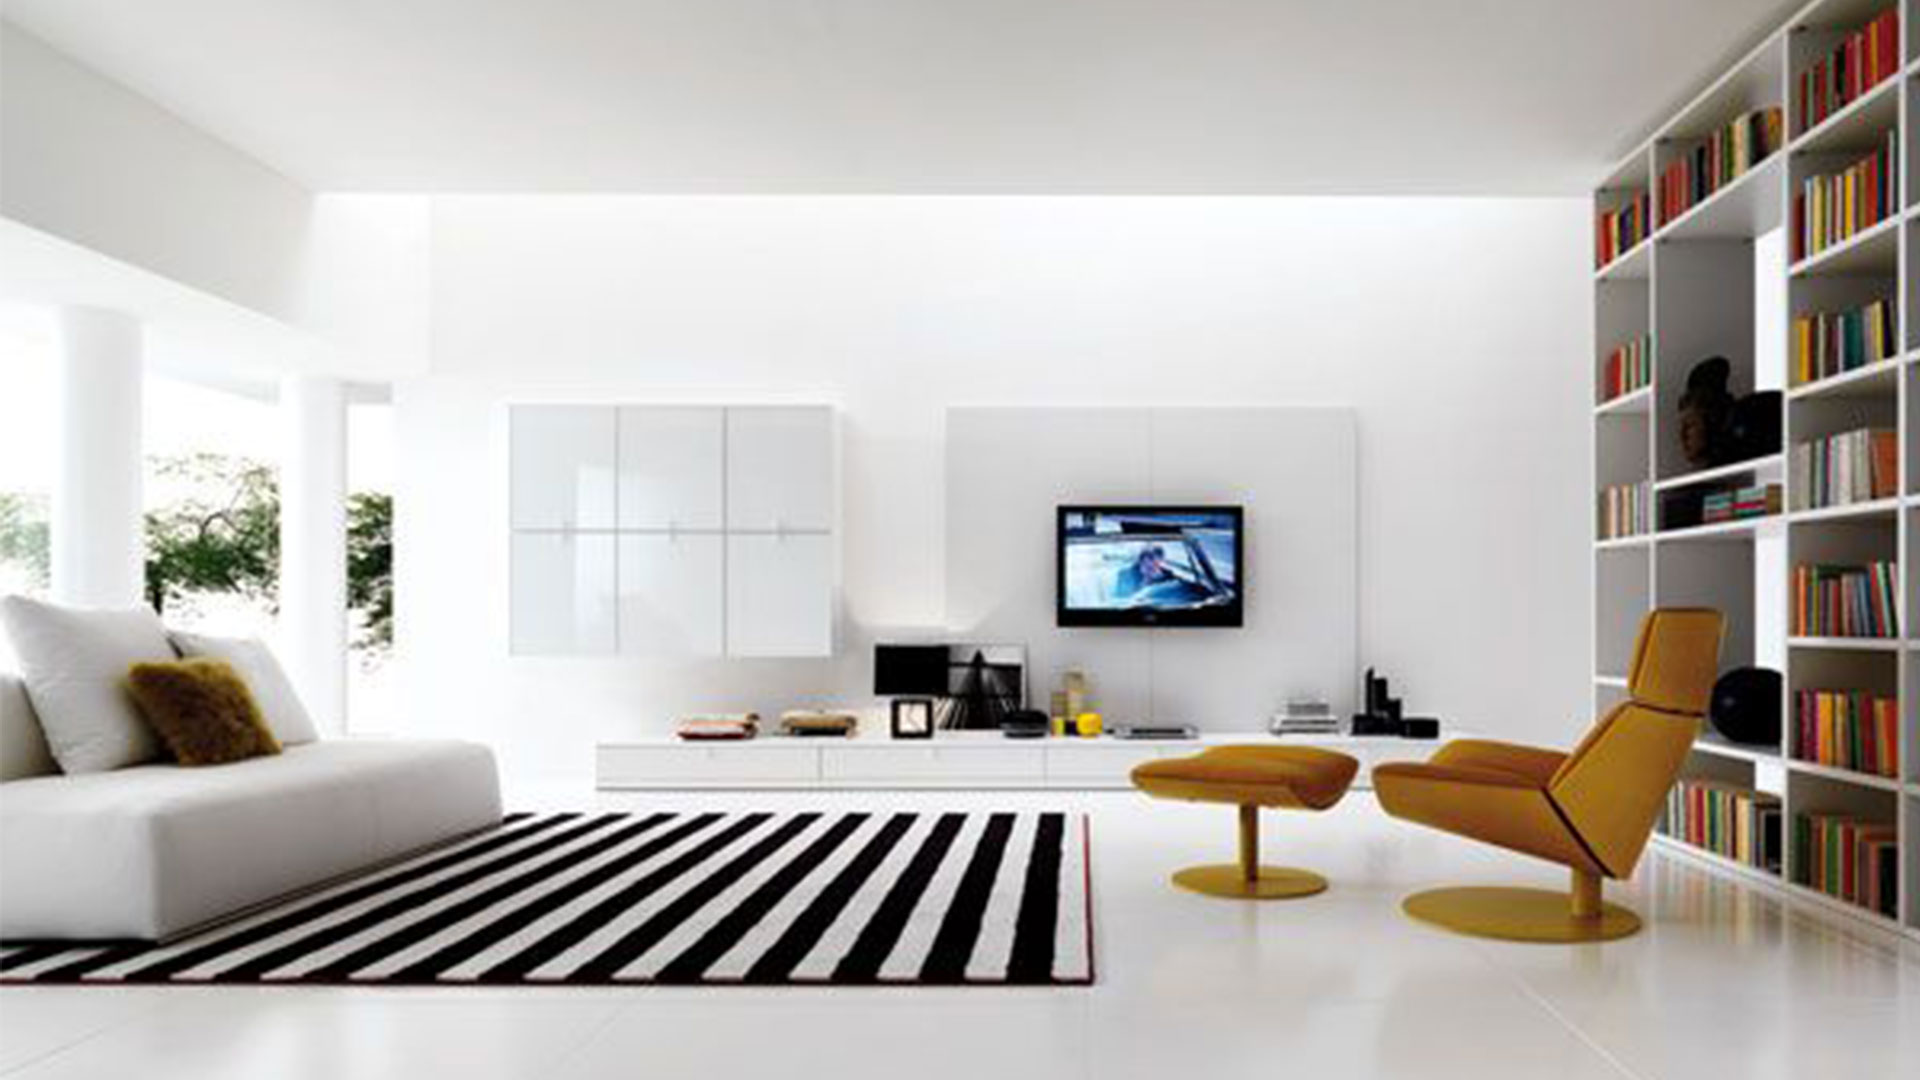 11 Awesome And Trendy Modern Living Room Design Ideas ...